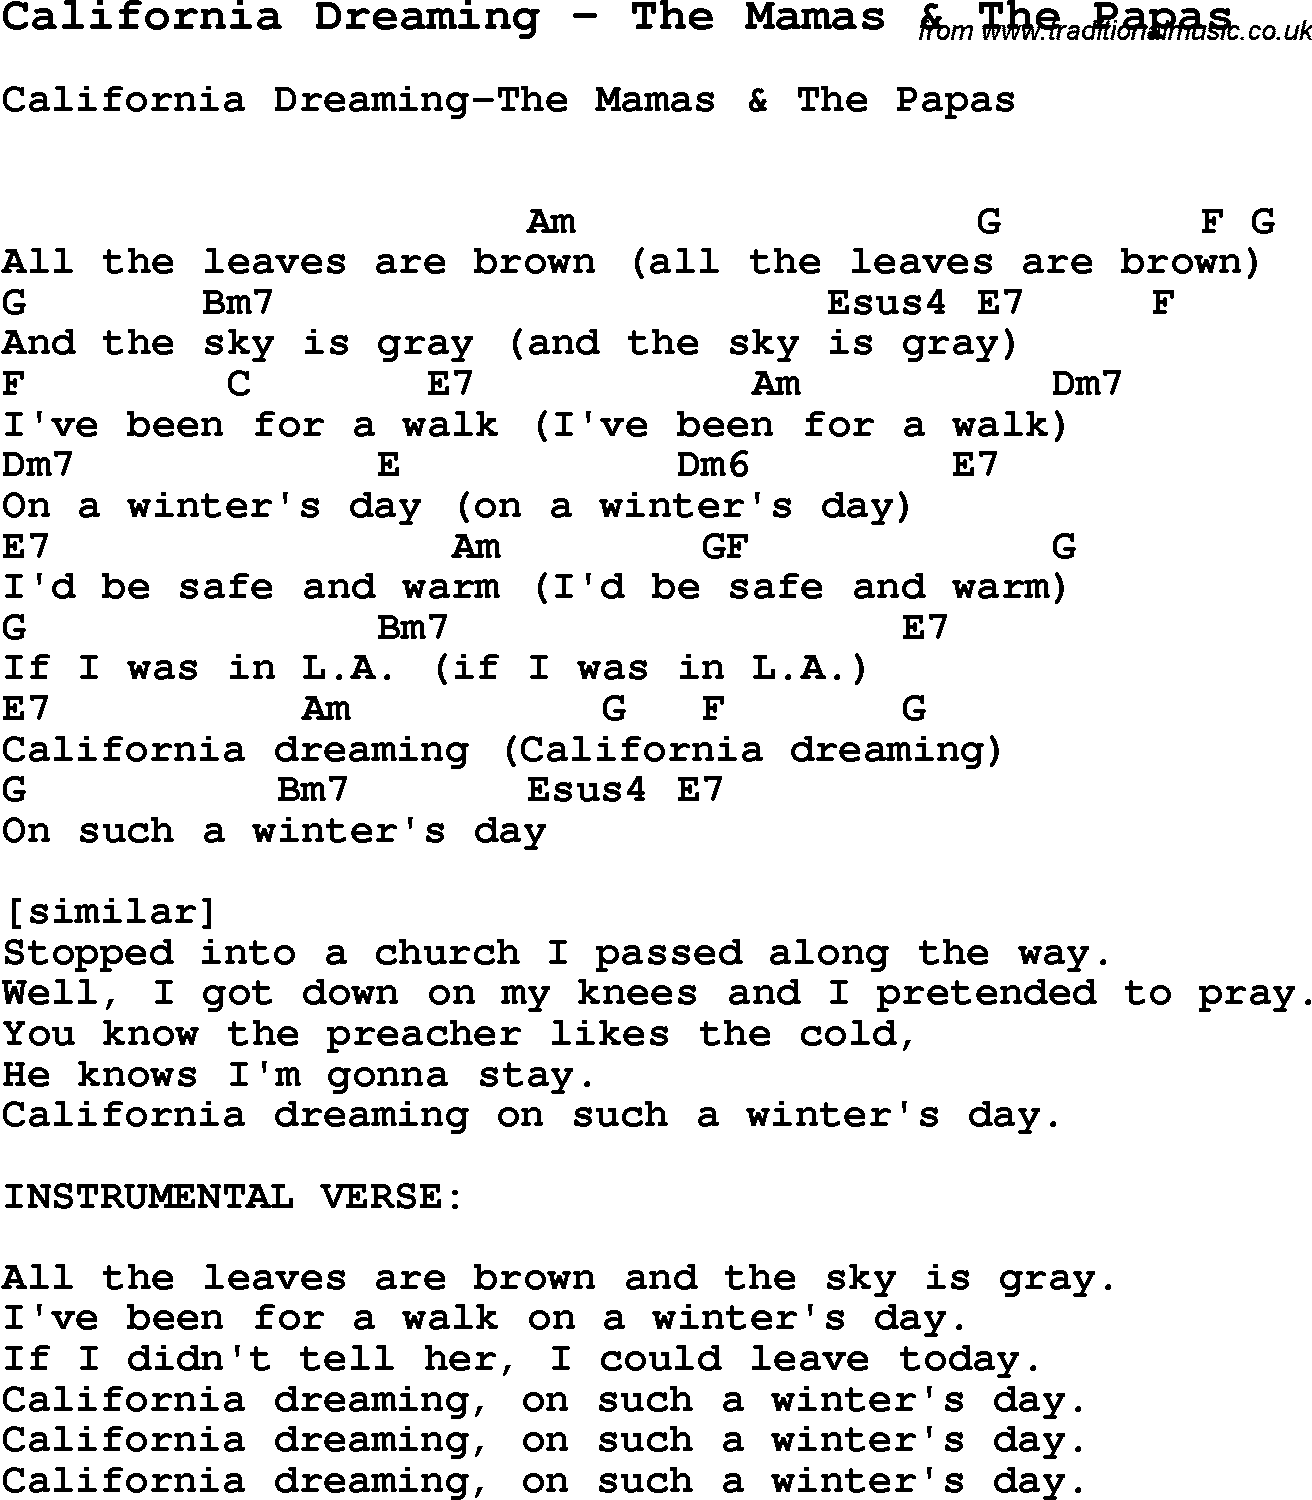 Song California Dreaming by The Mamas & The Papas, with lyrics for vocal performance and accompaniment chords for Ukulele, Guitar Banjo etc.